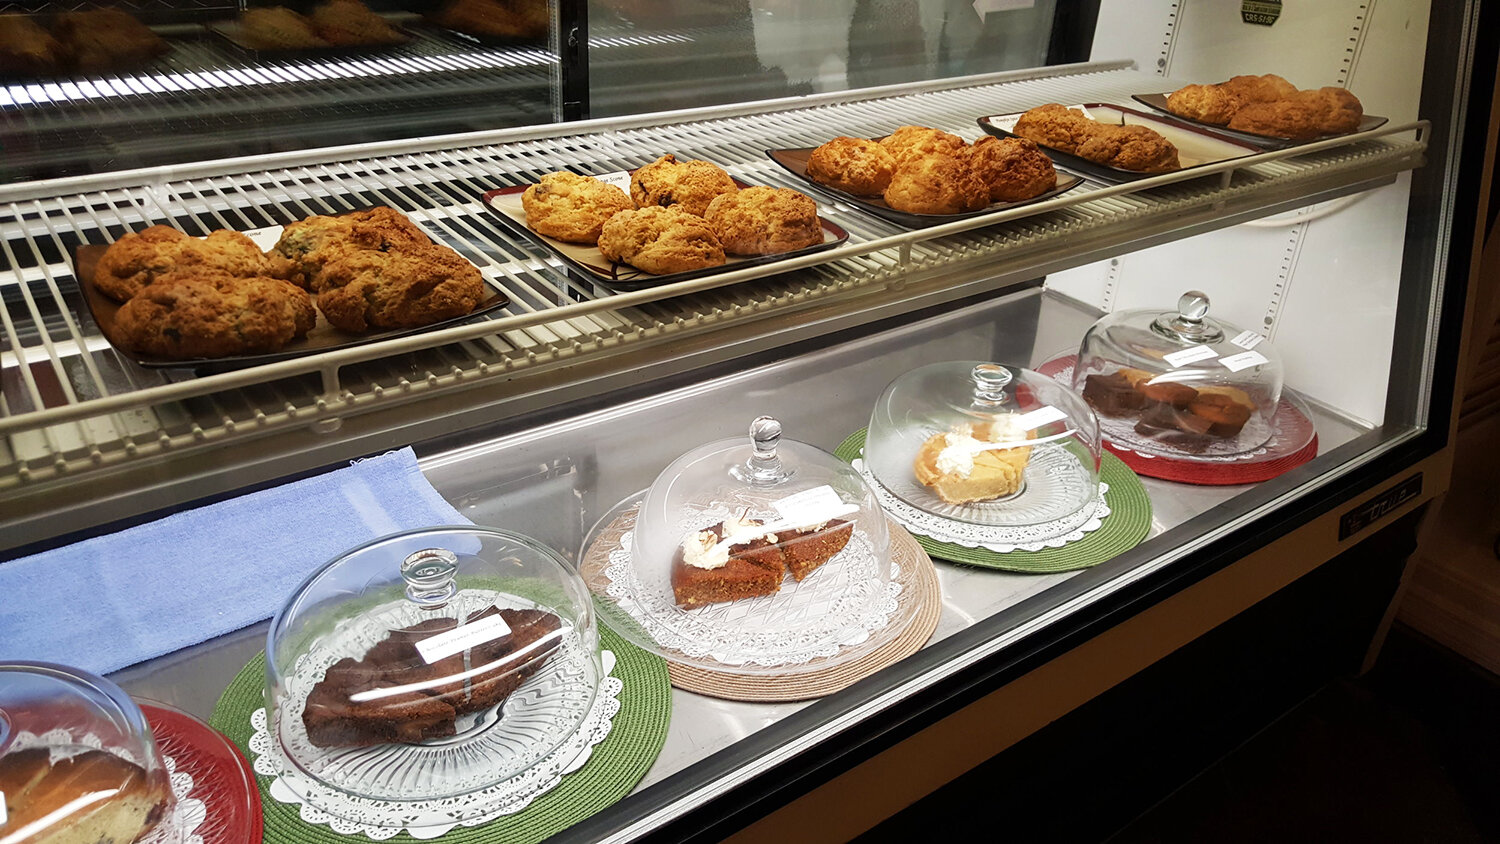  Scones and desserts in the display case. 